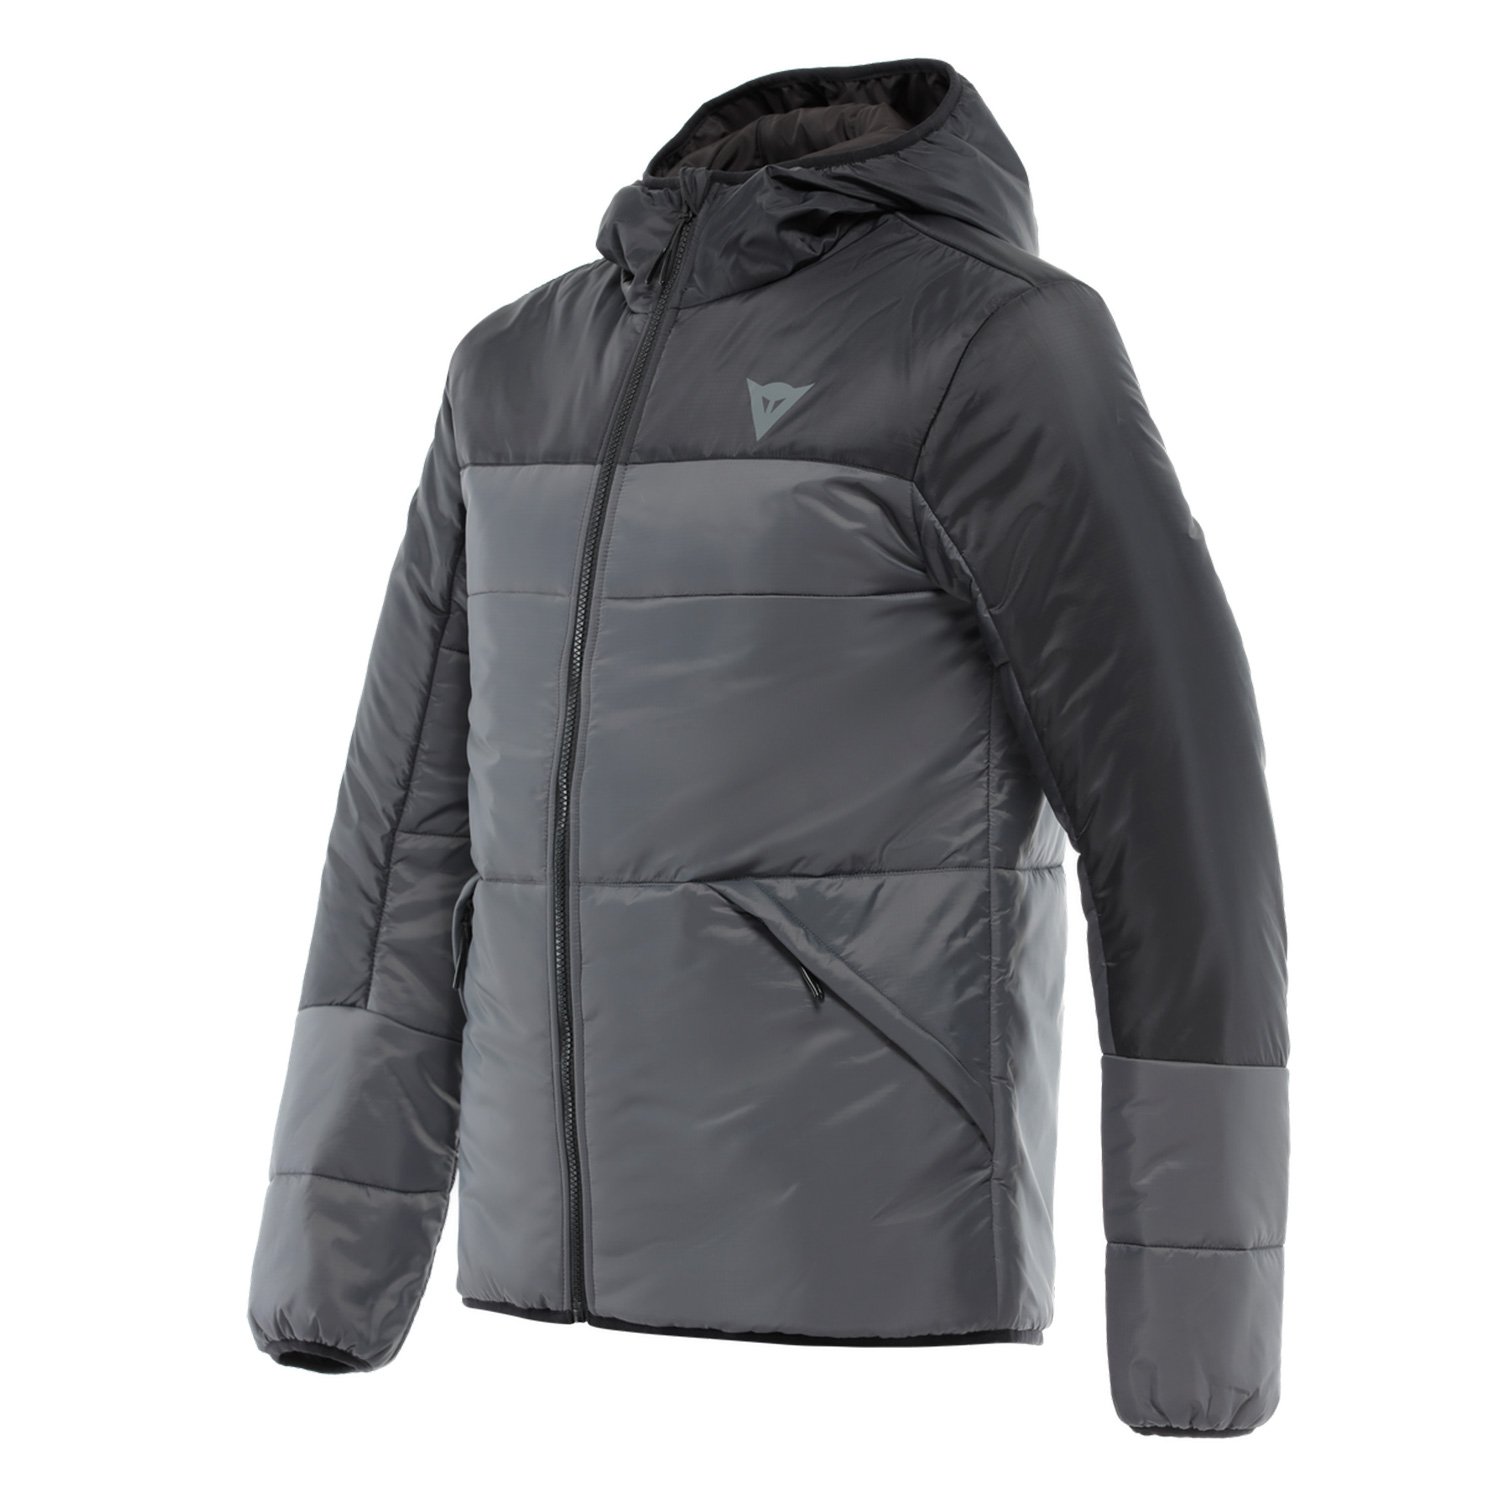 Image of Dainese After Ride Insulated Jacket Anthracite Size S ID 8051019657589